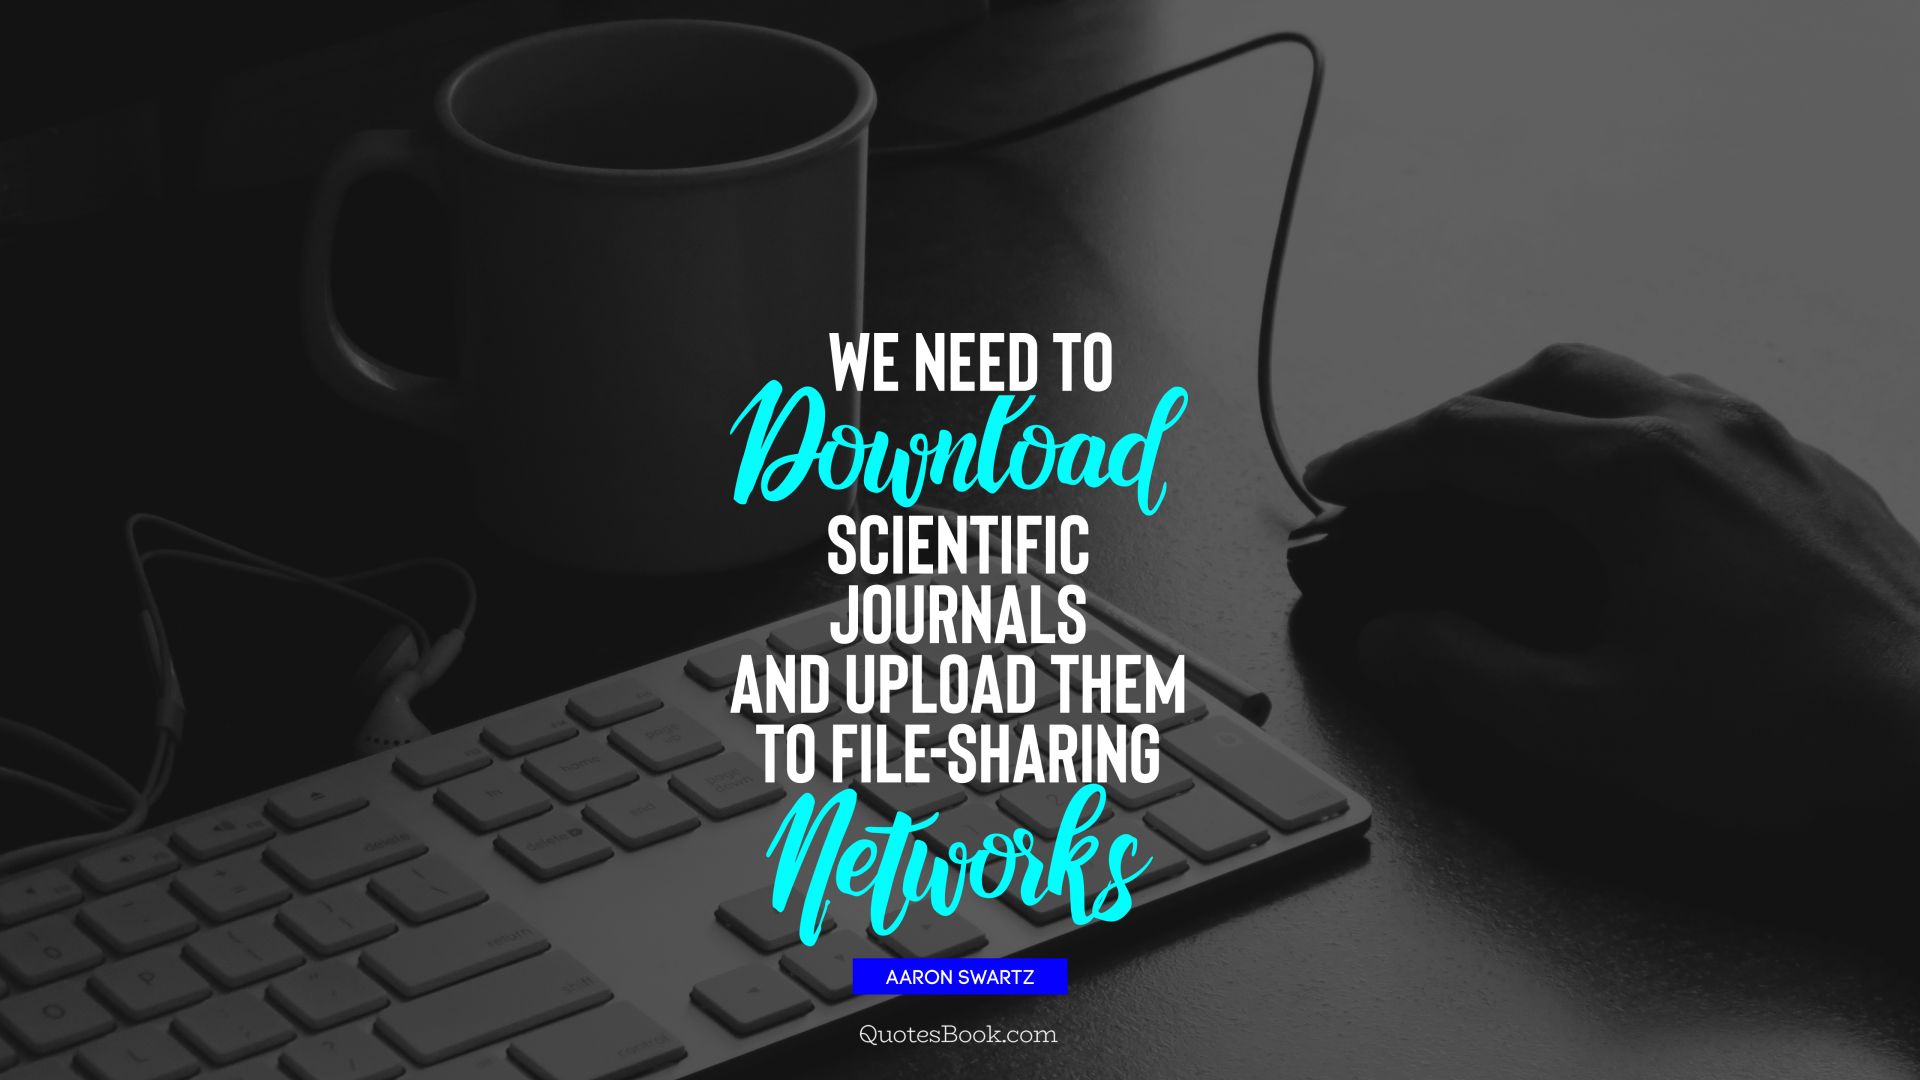 We need to download scientific journals and upload them to file-sharing networks. - Quote by Aaron Swartz